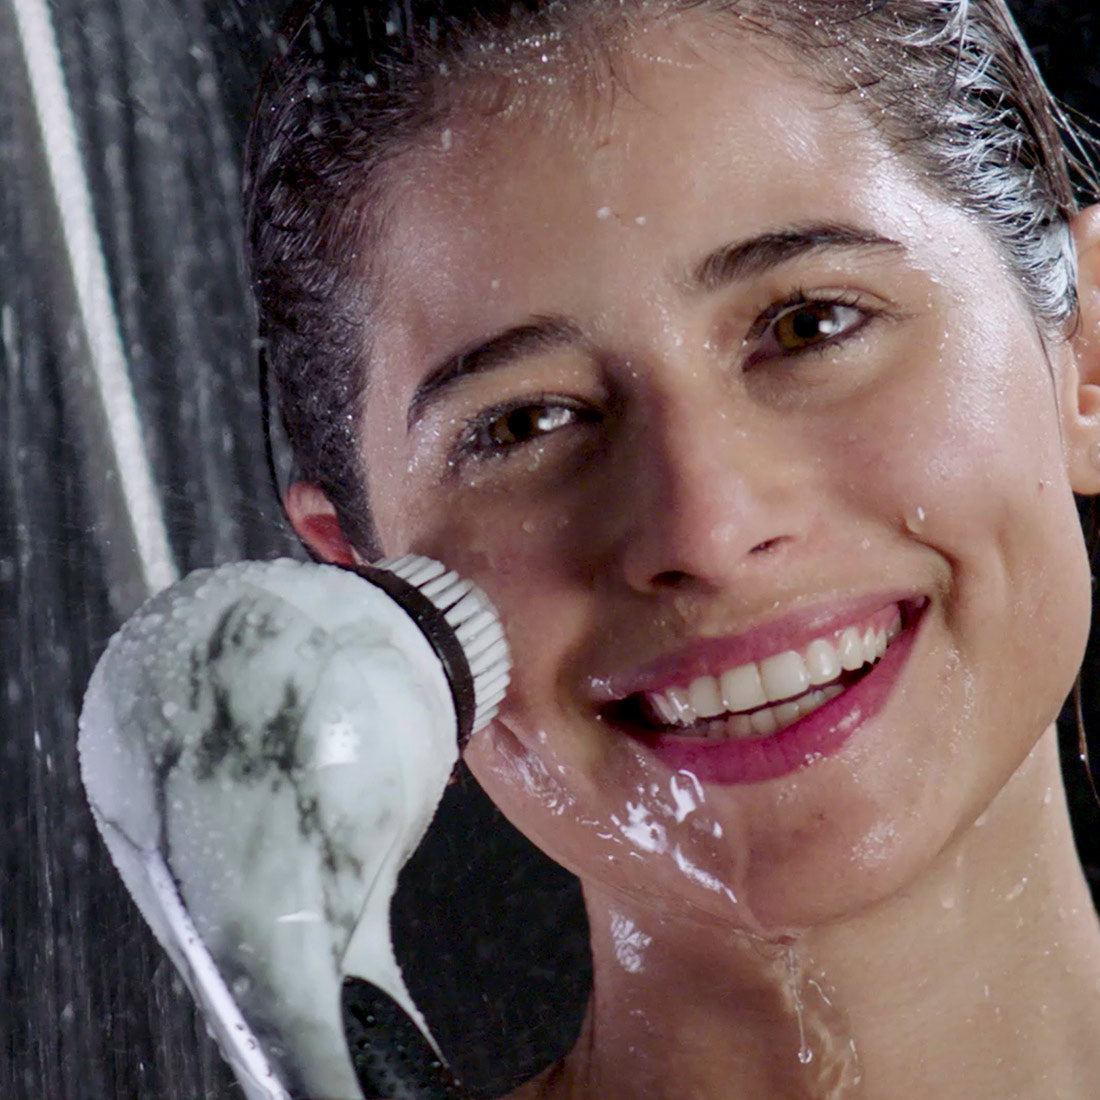 A woman smiling in the shower while using a Michael Todd Beauty Hydrojet handheld shower system.